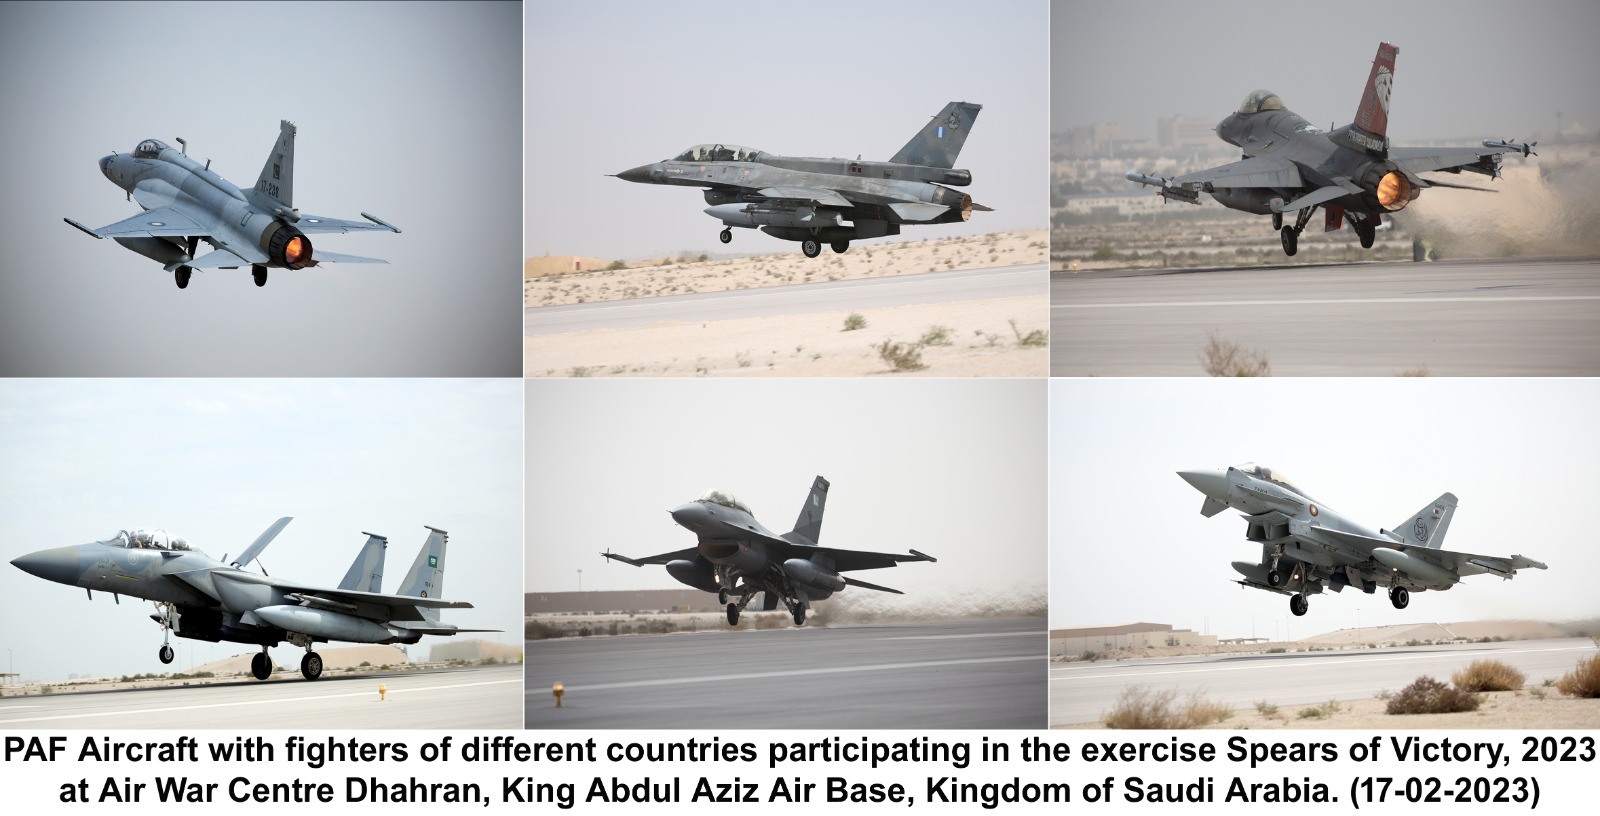 EXERCISE SPEARS OF VICTORY, 2023 CONCLUDES AT KING ABDULAZIZ AIR BASE.